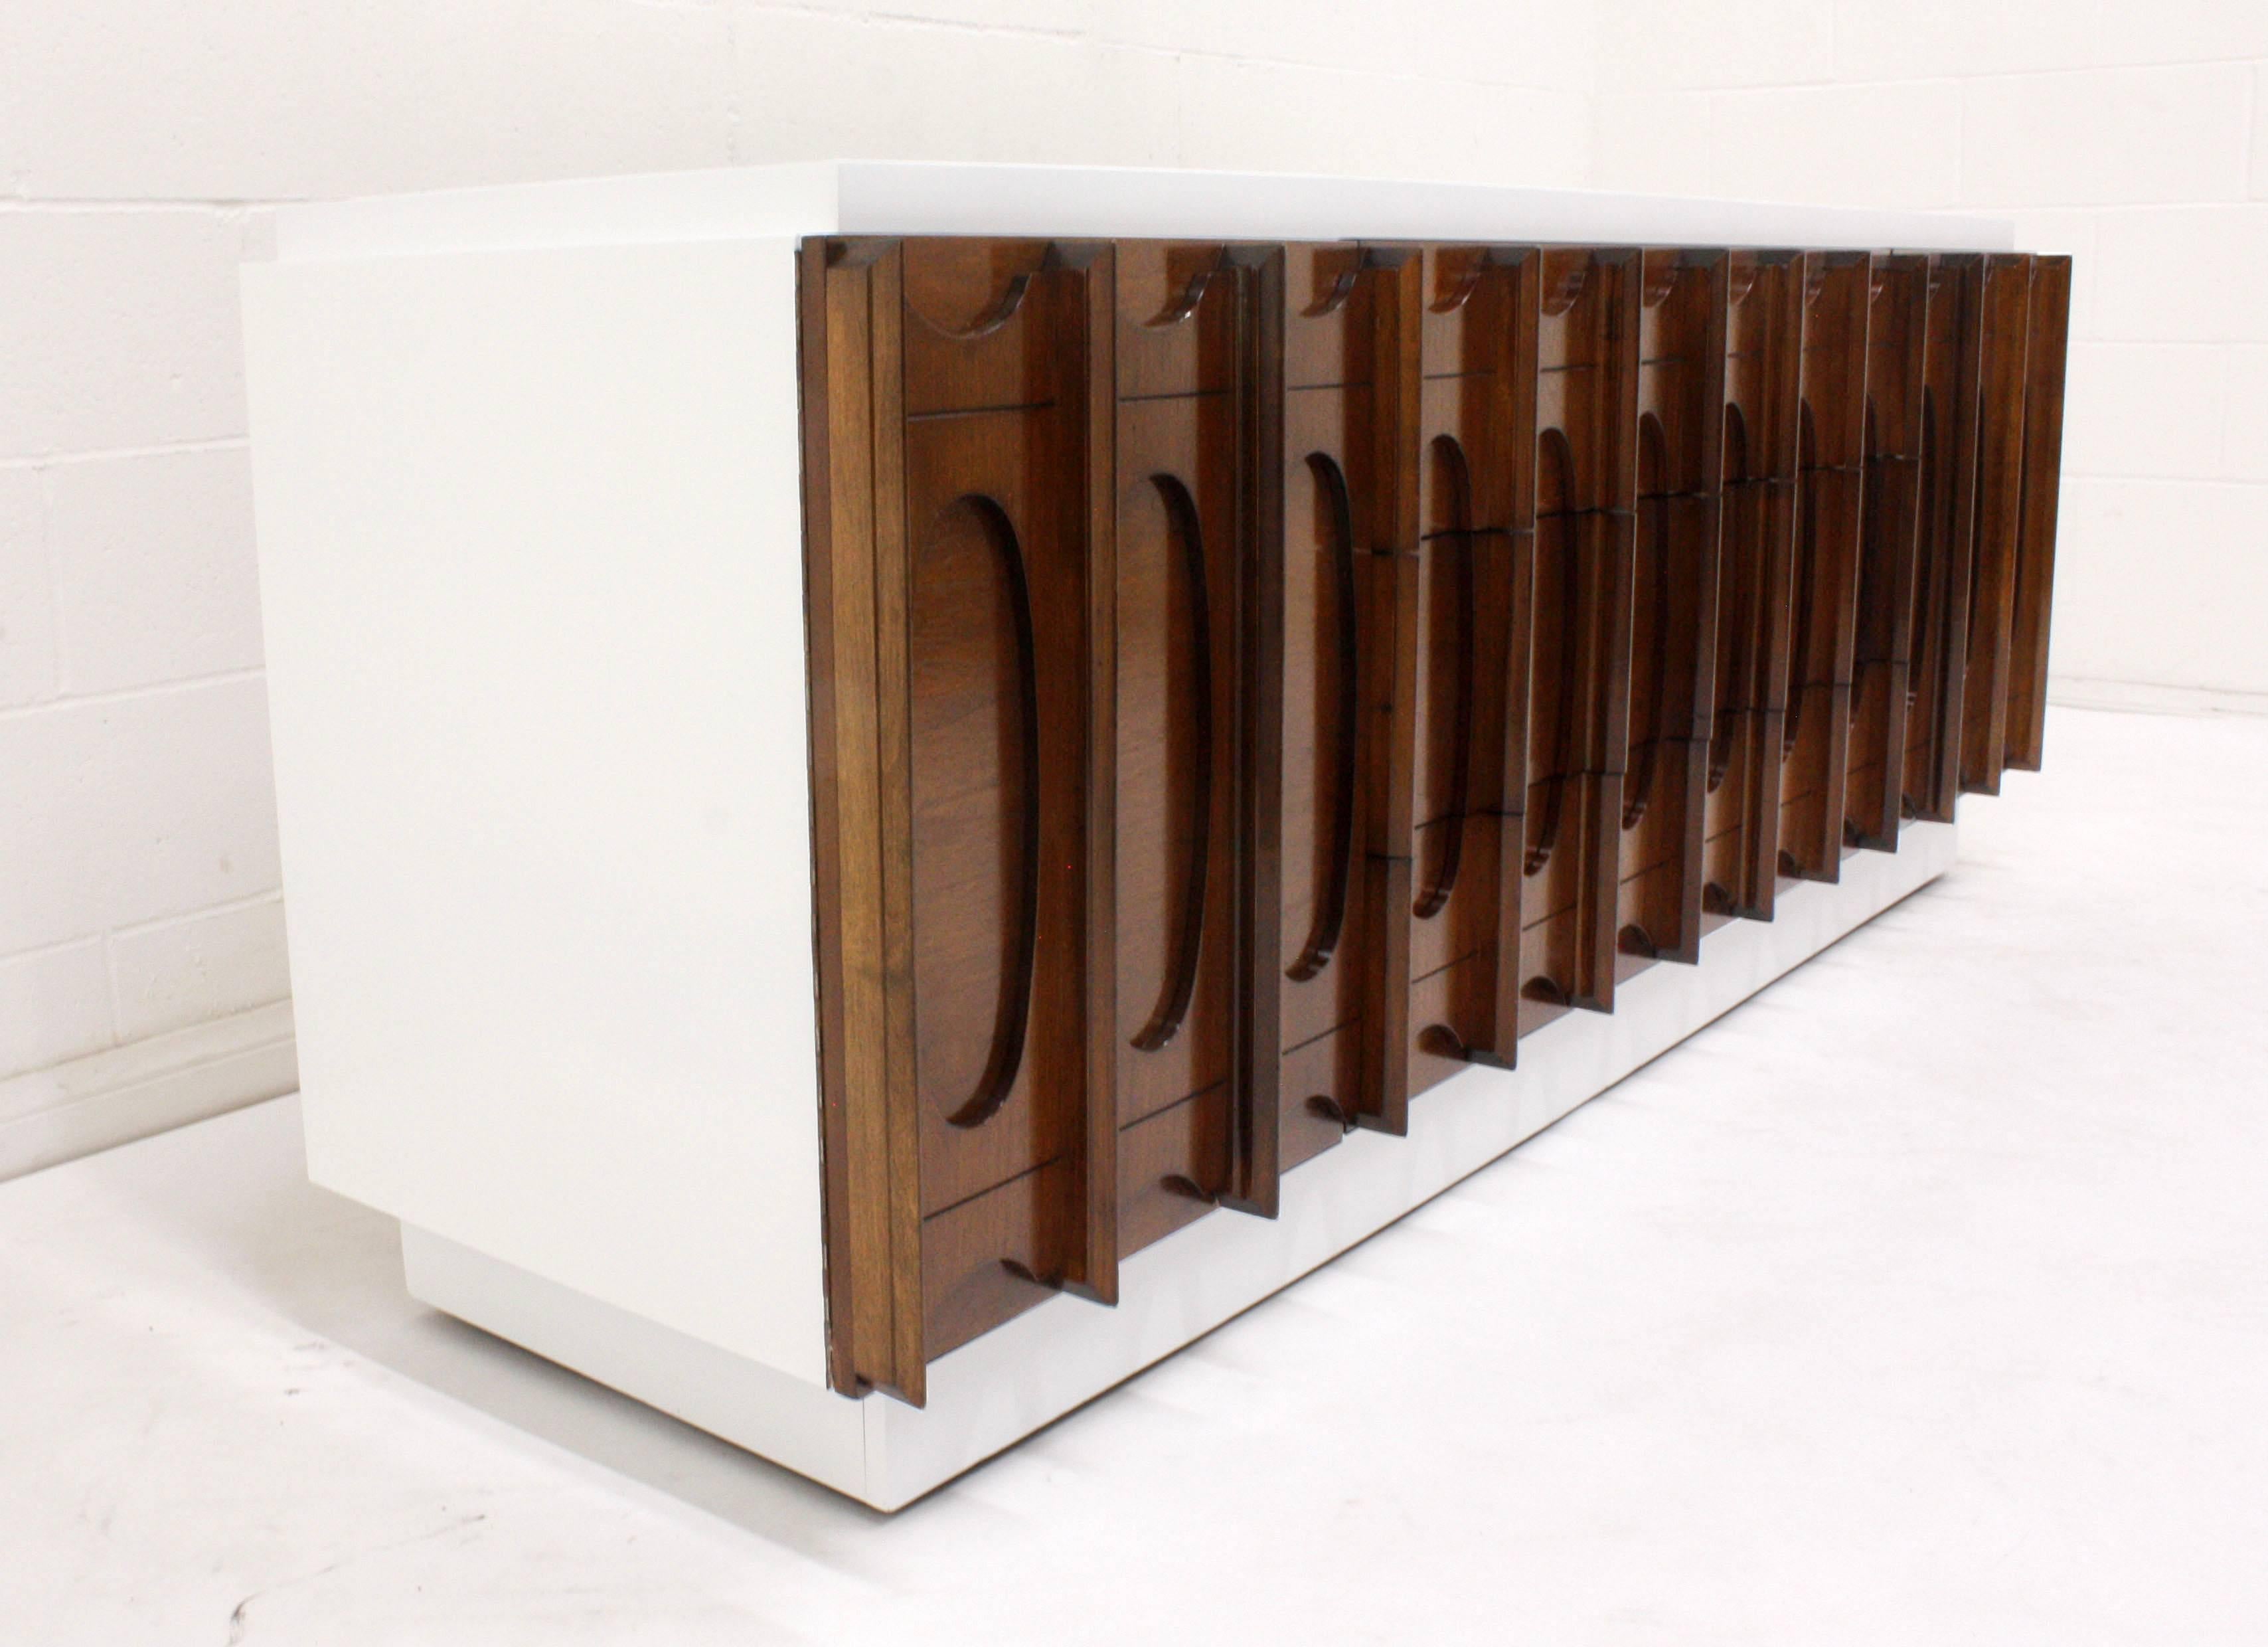 This 1960s Mid-Century Modern style credenza has been completely restored and is finished in a two-tone color combination with a lacquered finish. The top, sides, and bottom of the credenza is finished in a stark white and the cabinet doors and